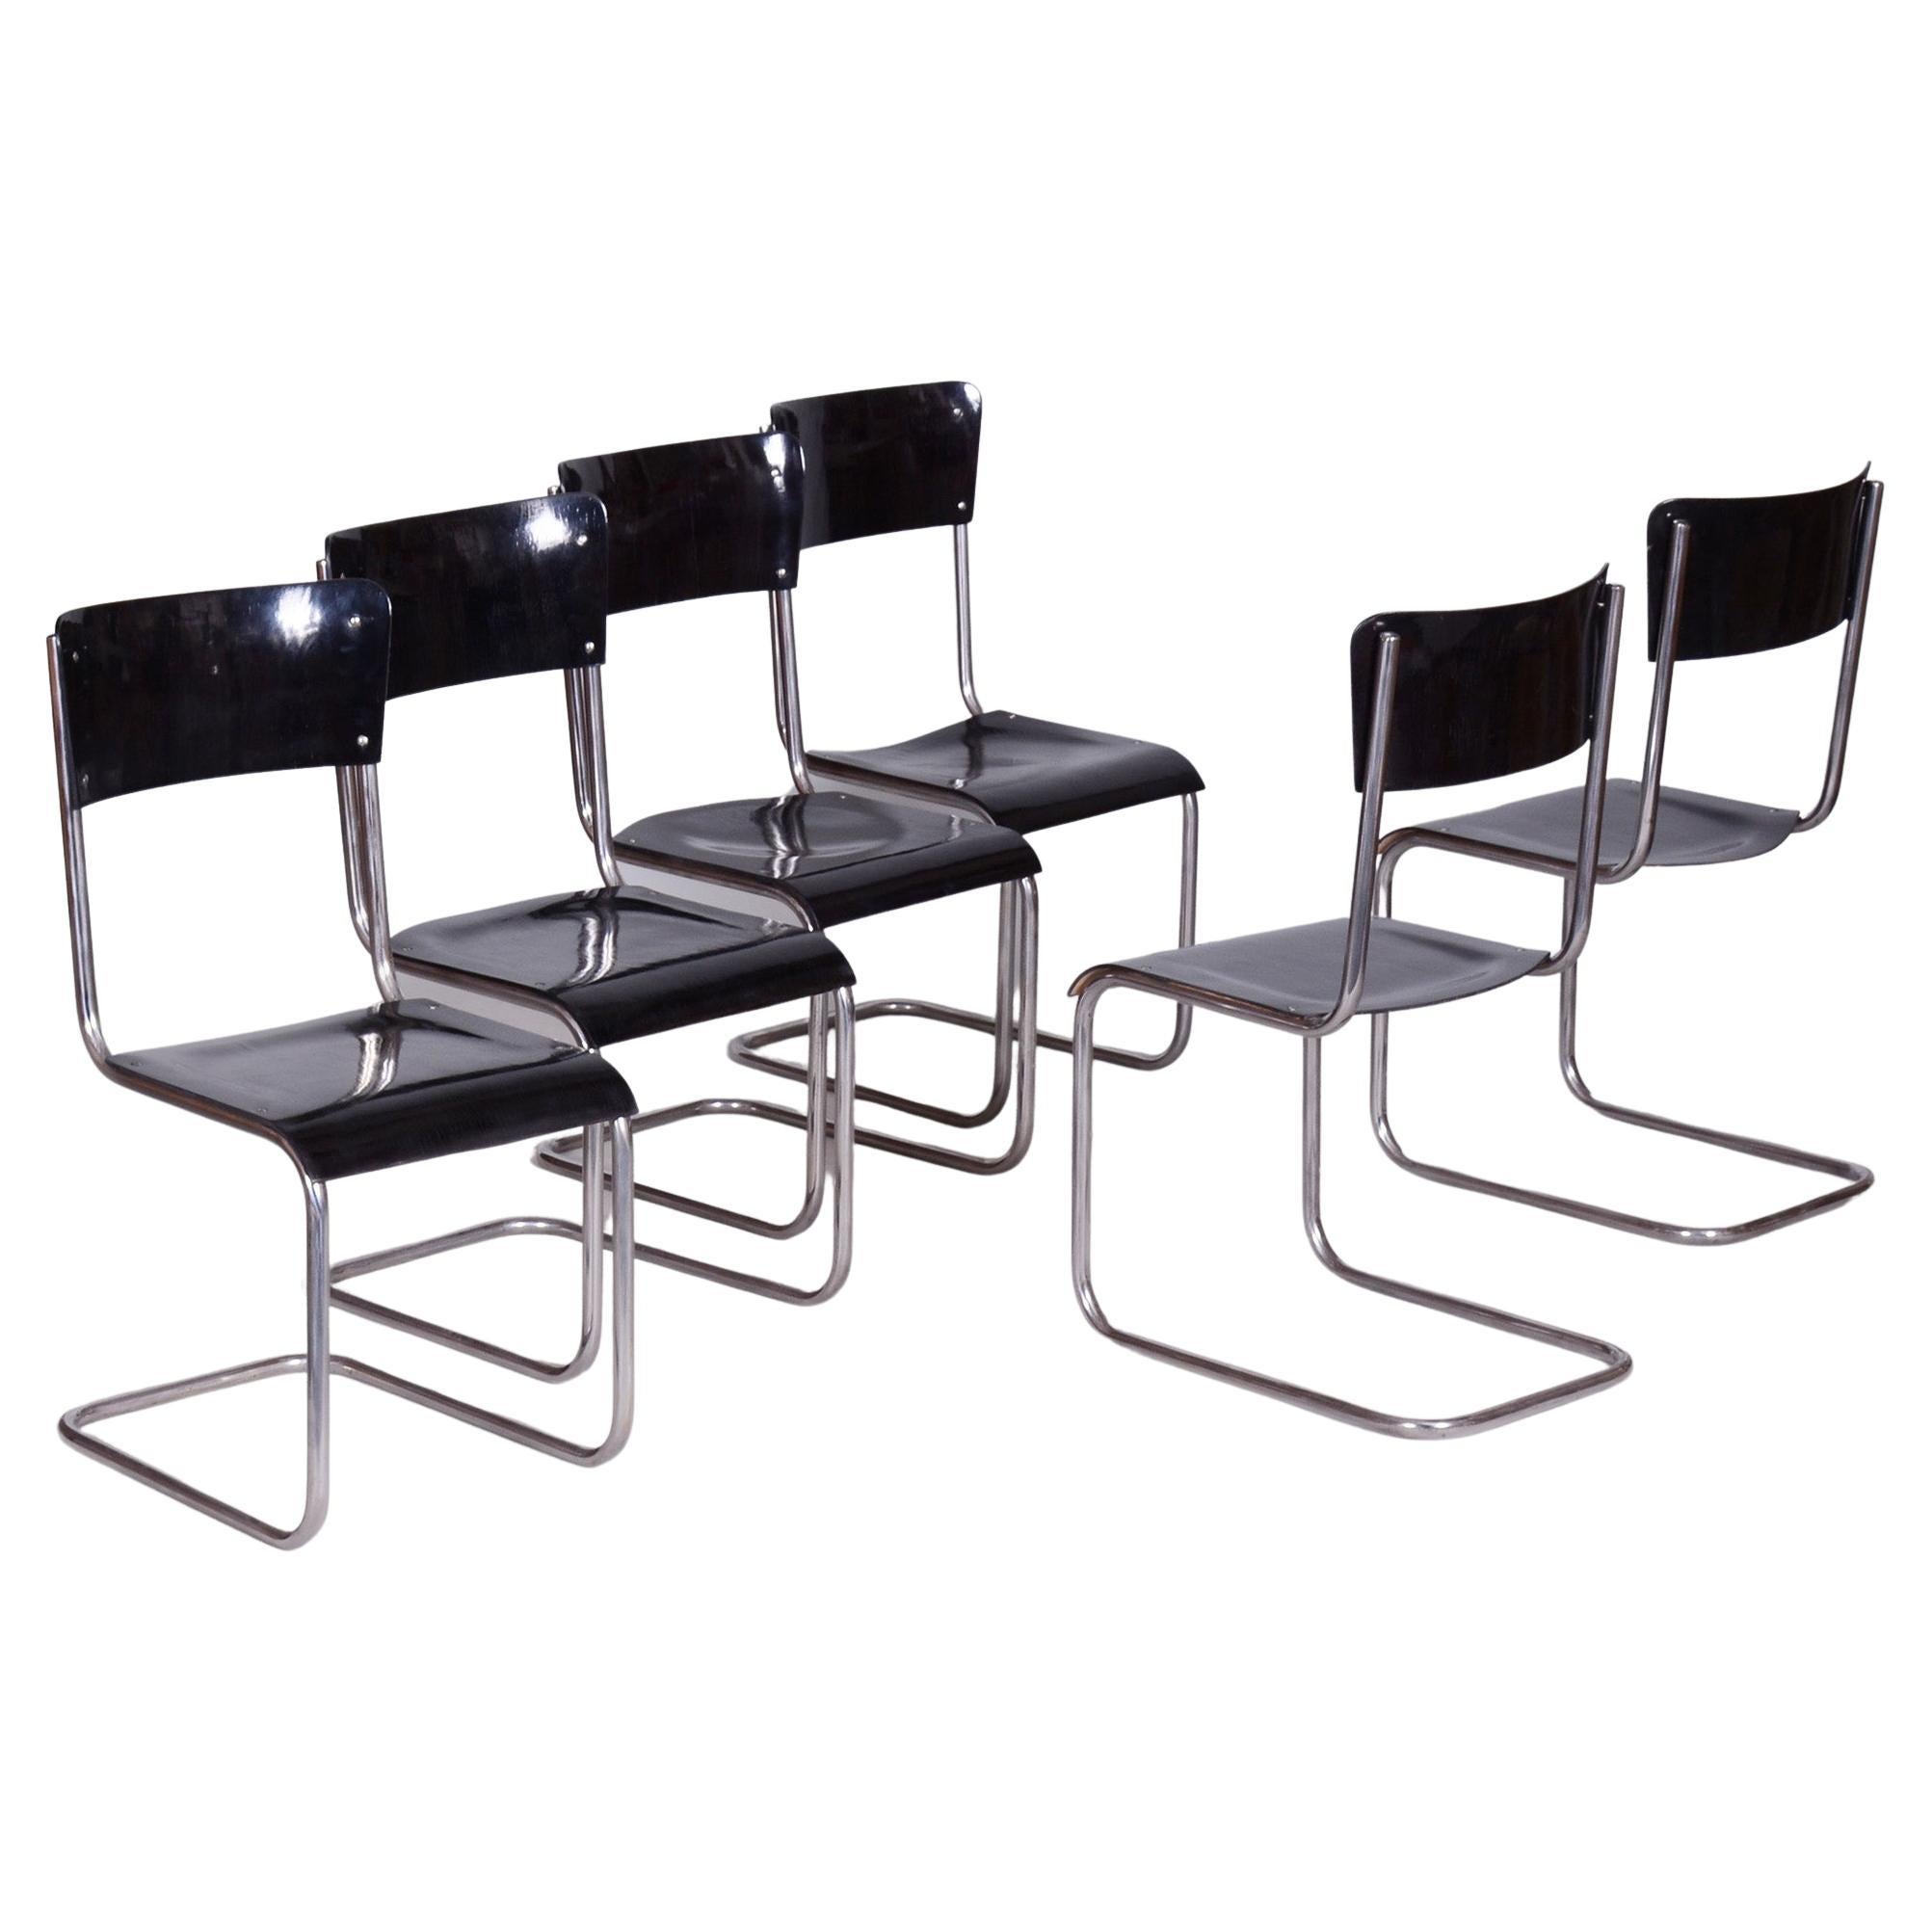 Set of 6 Vintage Bauhaus Chairs, Restored, Gloss, Vichr a Spol, Czechia, 1930s For Sale